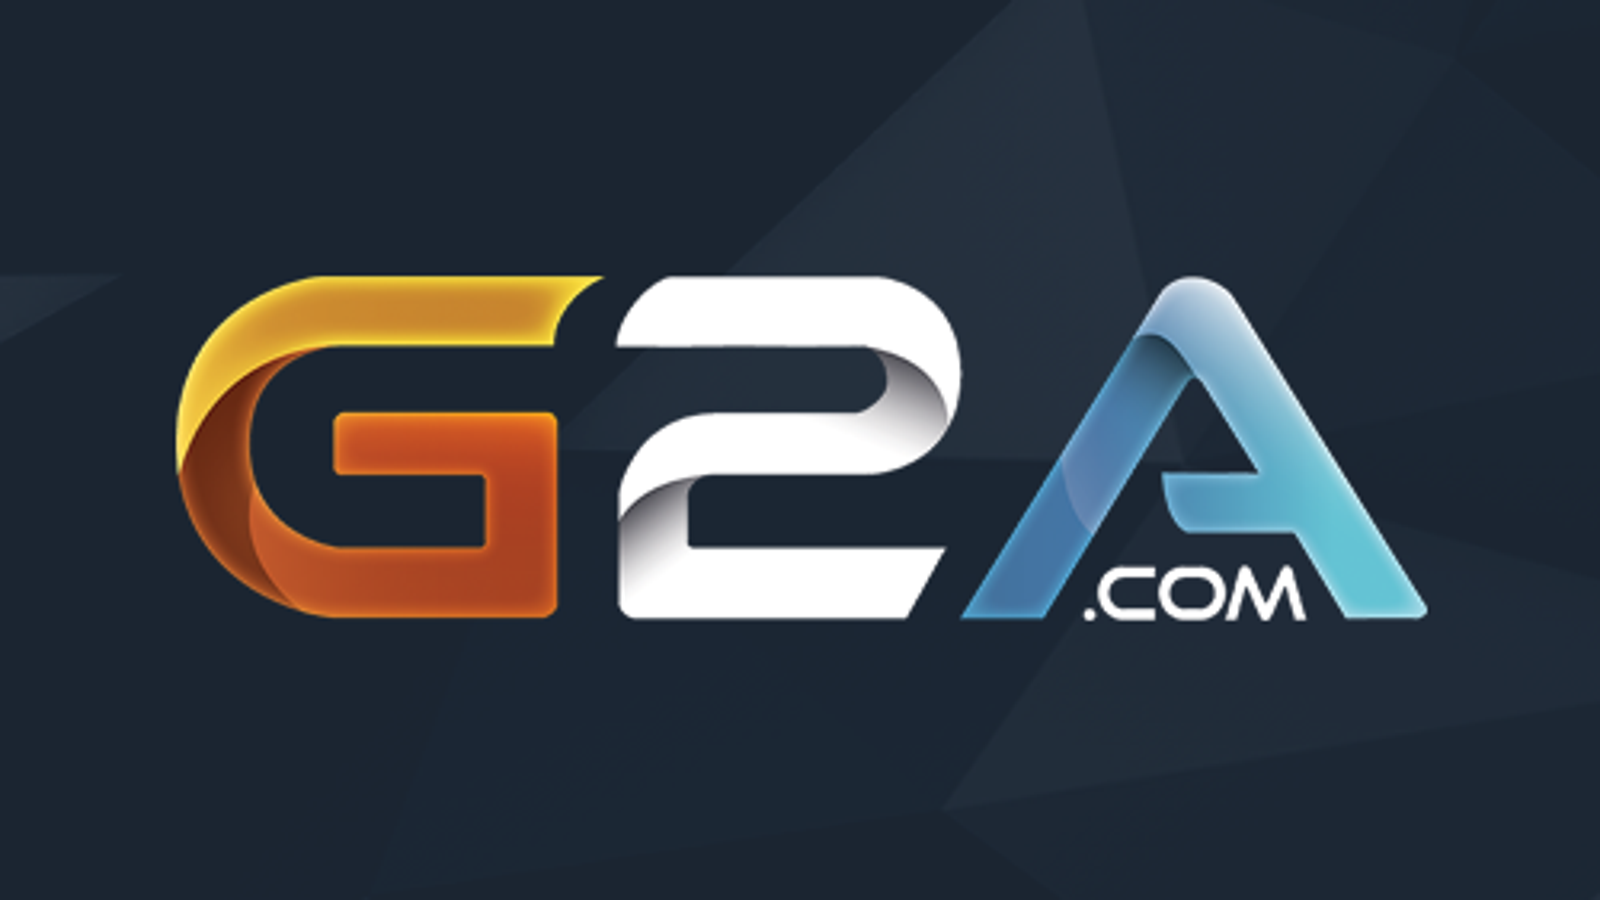 G2A.COM - What does it mean to be a casual❓